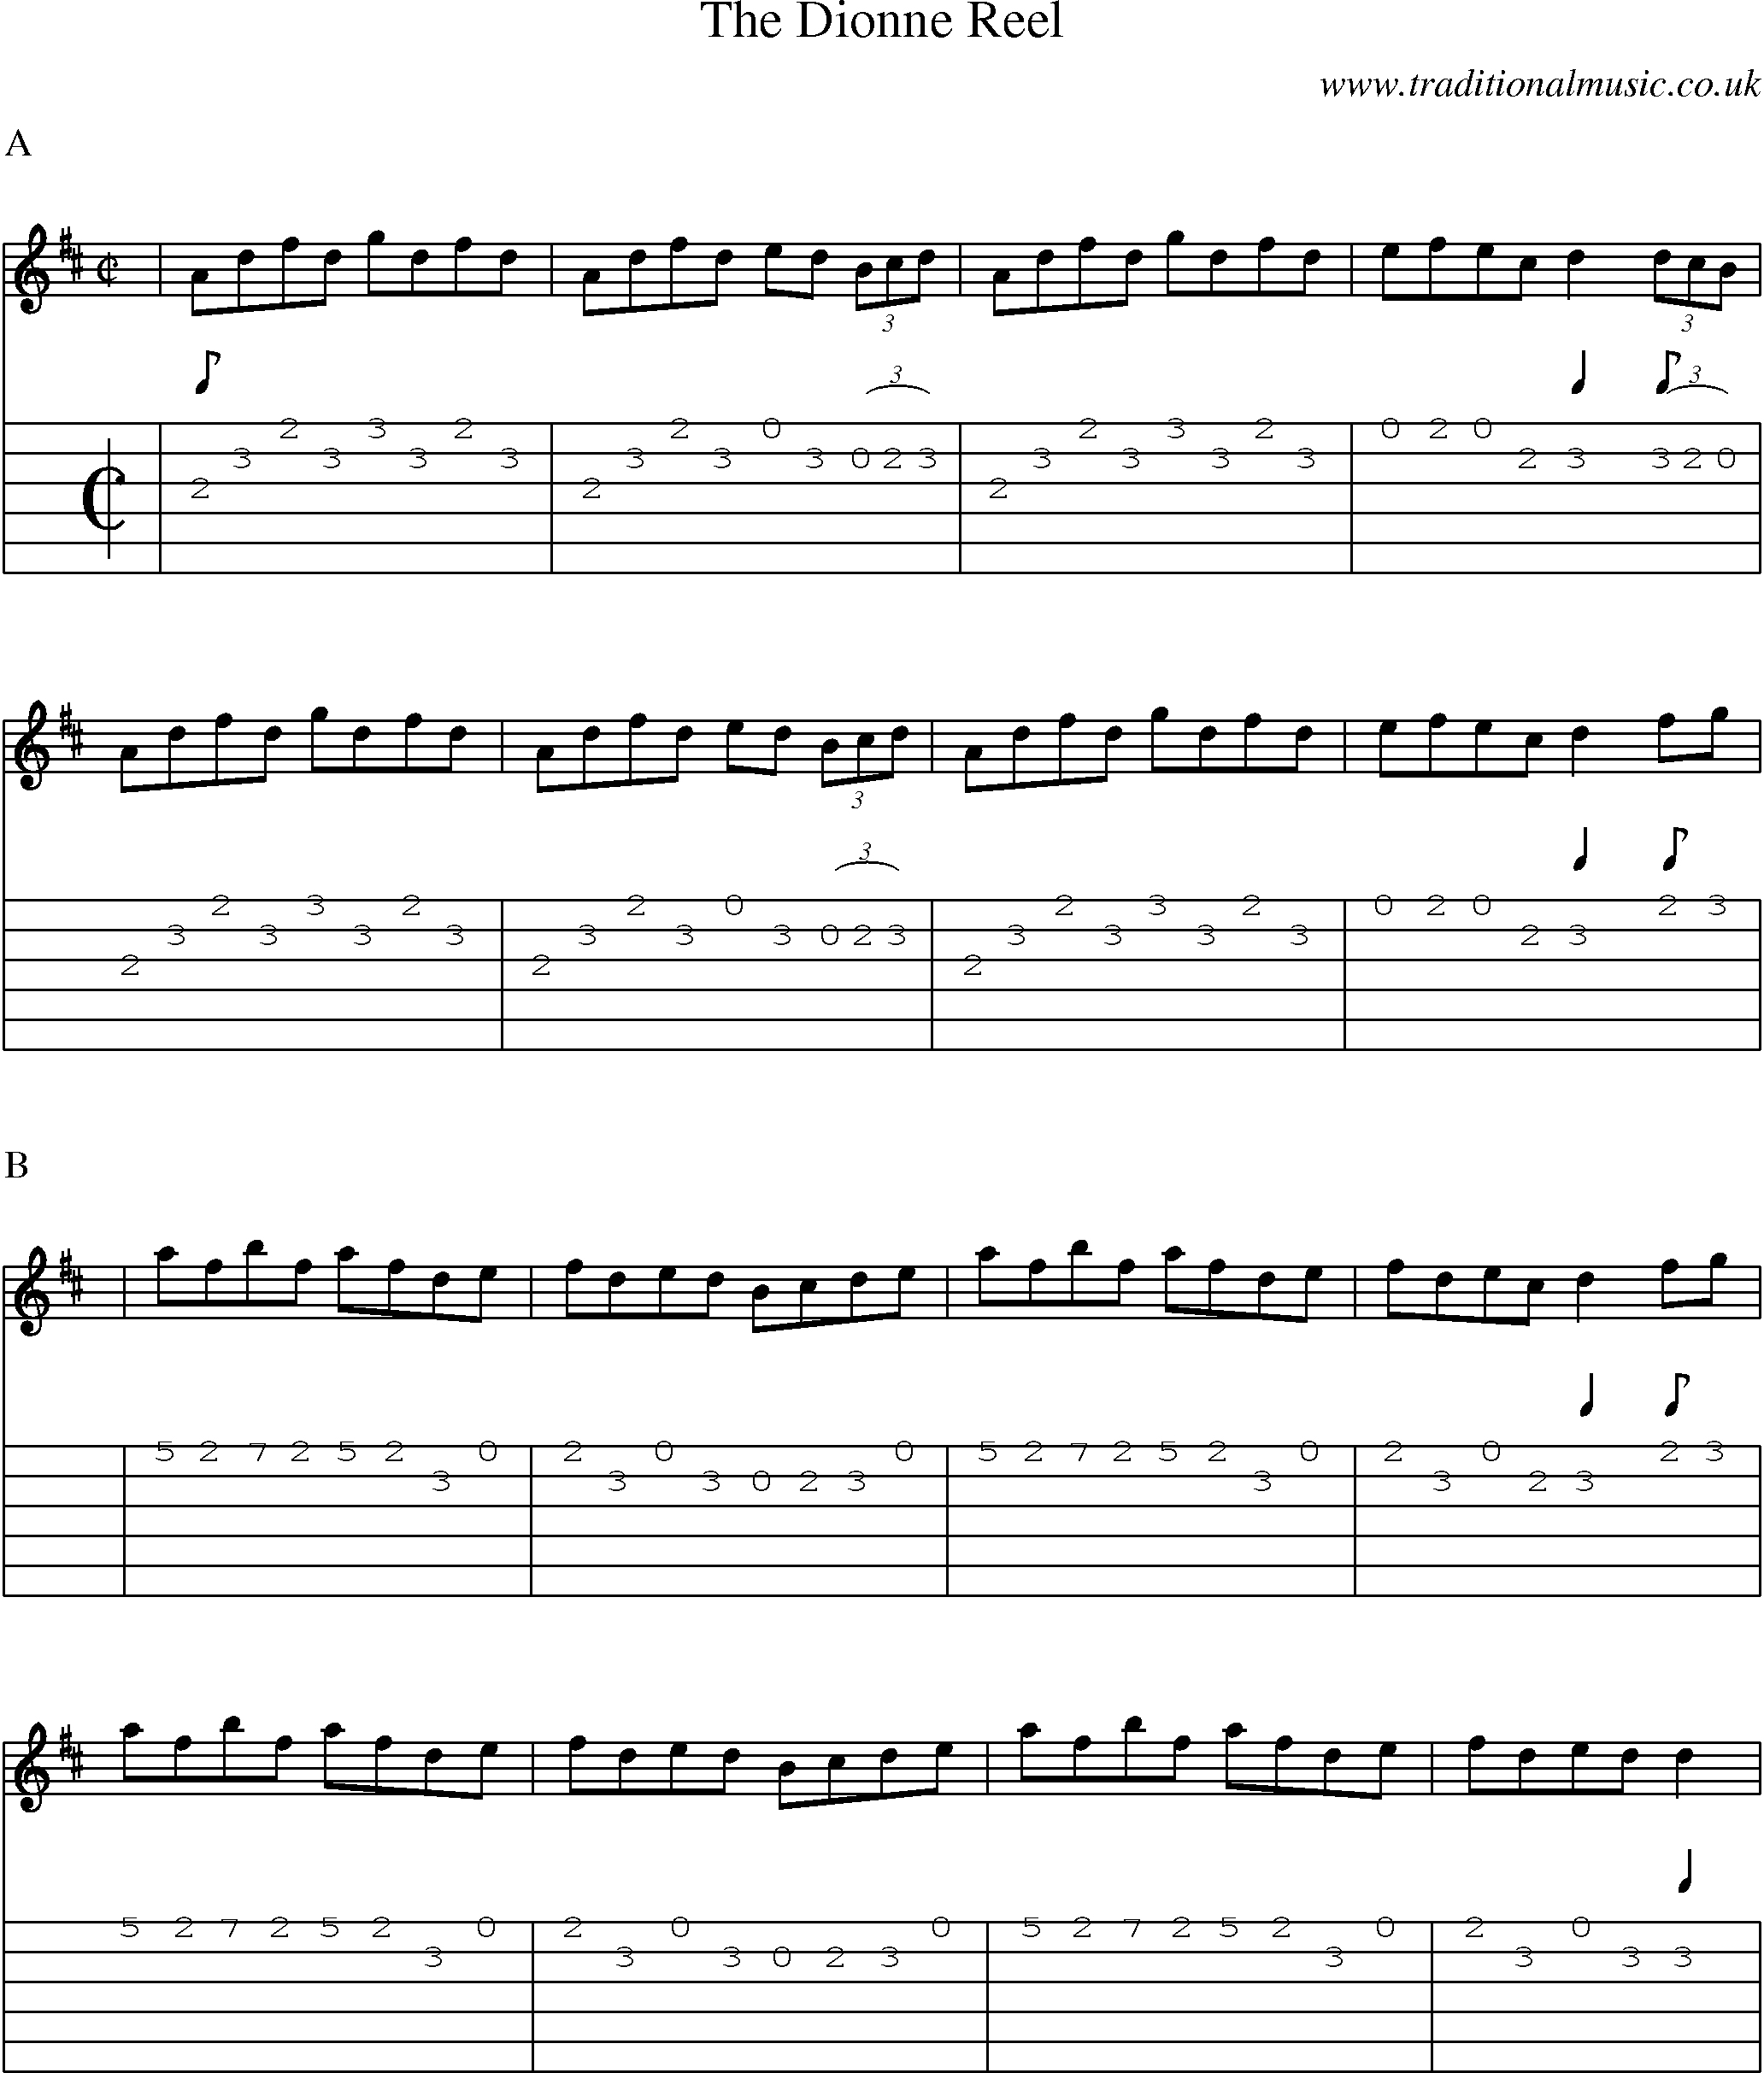 Music Score and Guitar Tabs for The Dionne Reel